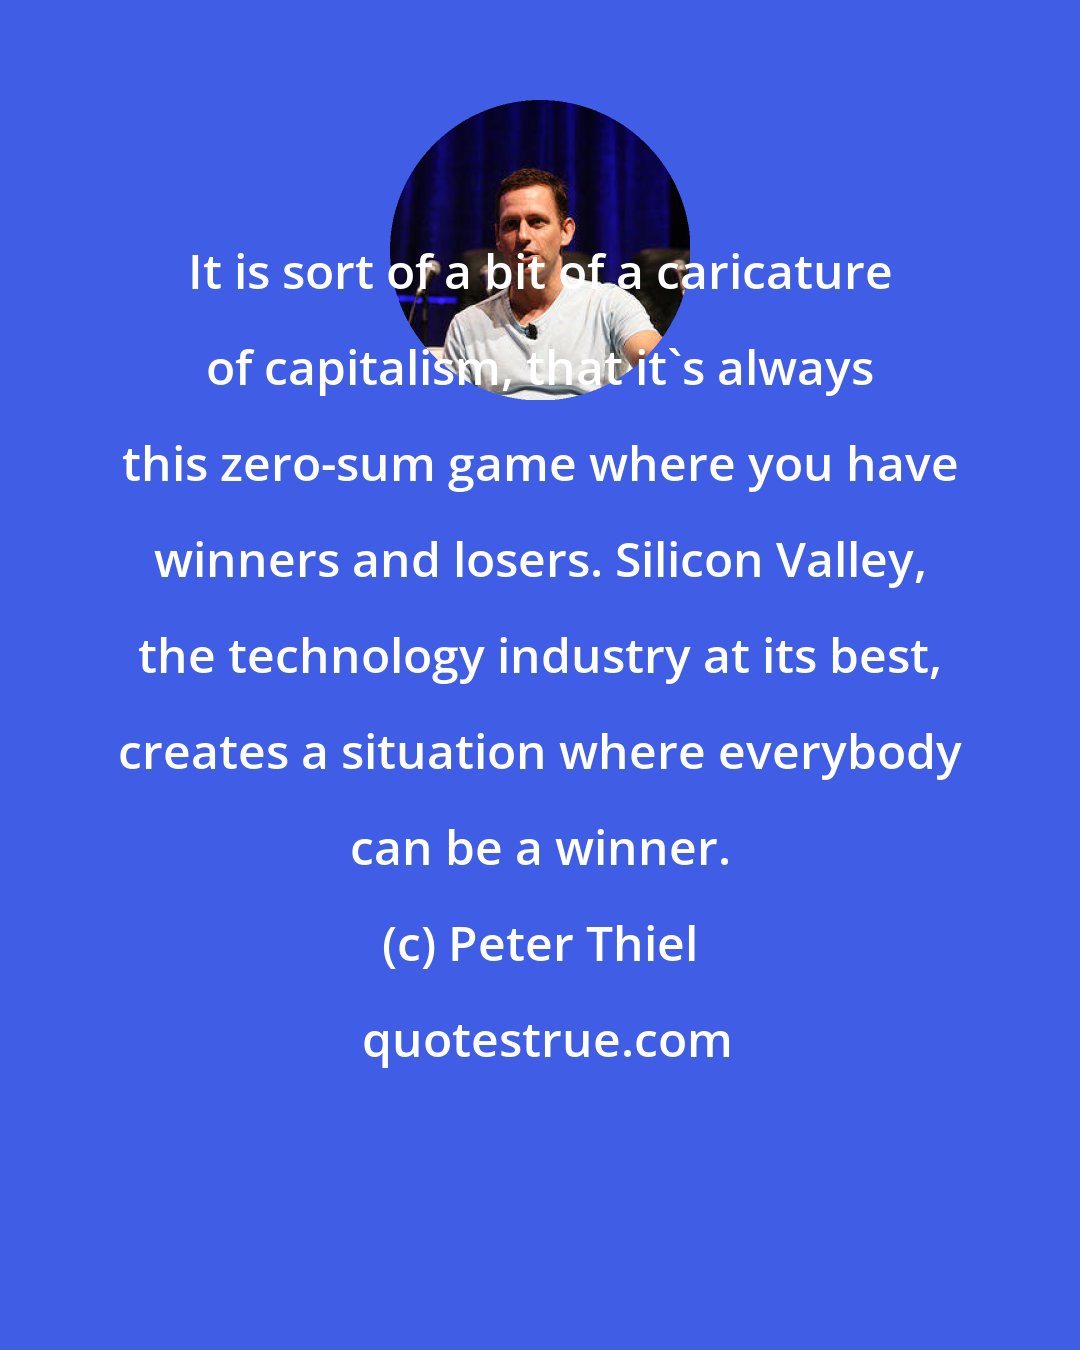 Peter Thiel: It is sort of a bit of a caricature of capitalism, that it's always this zero-sum game where you have winners and losers. Silicon Valley, the technology industry at its best, creates a situation where everybody can be a winner.